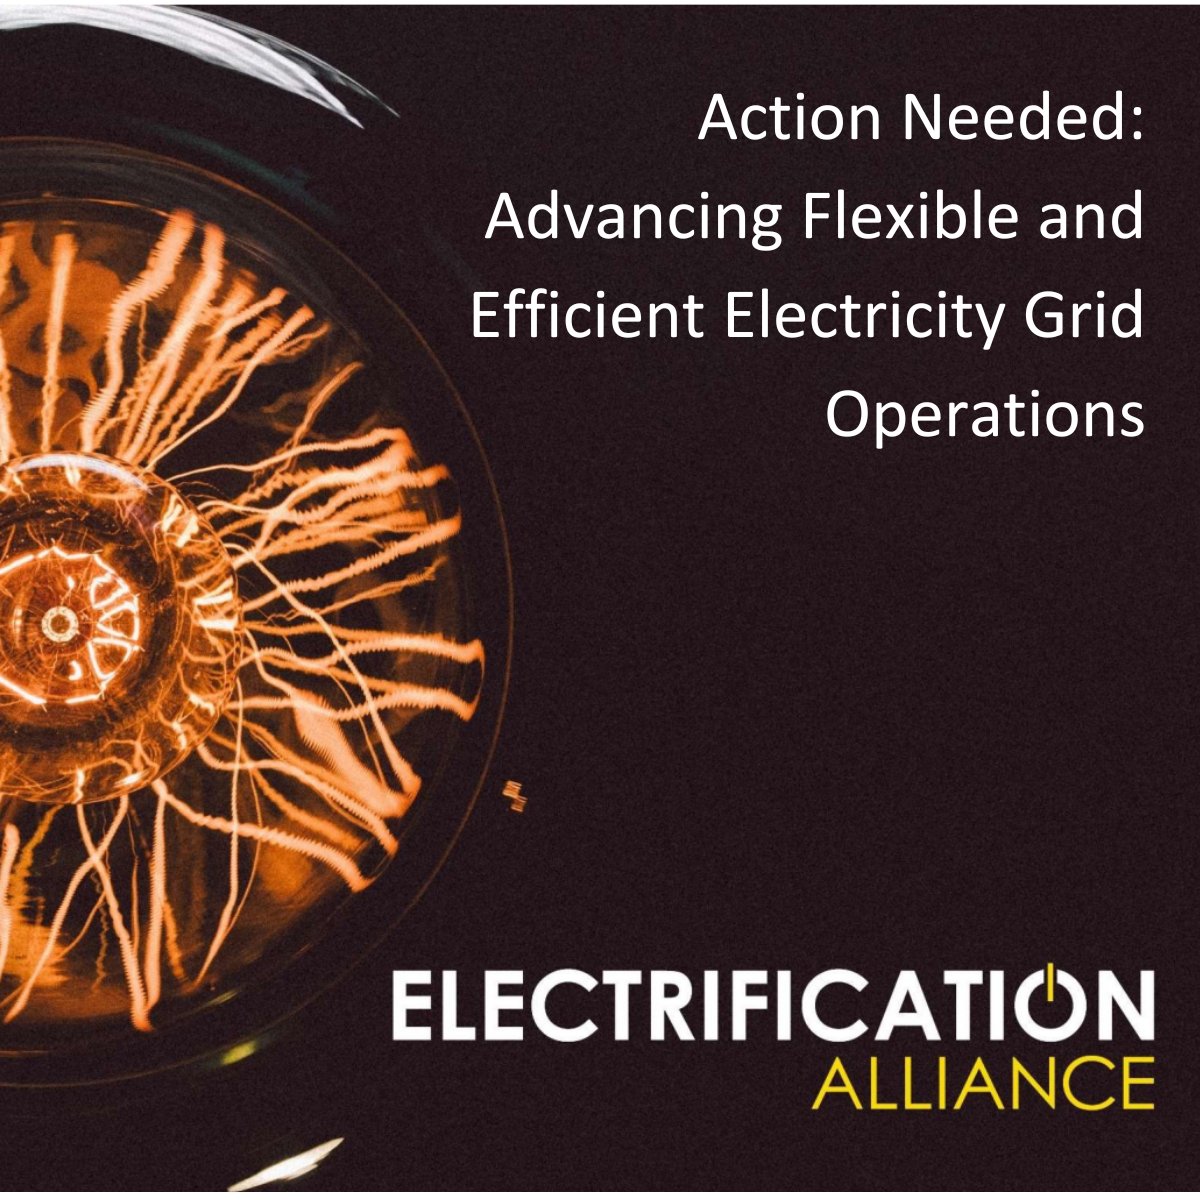 As part of the @Elec_All, representing the #electricity value chain, we call on Member States to foster the flexible & efficient operation of #ElectricityGrids while planning their sufficient expansion & reinforcement to reach the EU’s #NetZero target! ℹ️ shorturl.at/psRX1